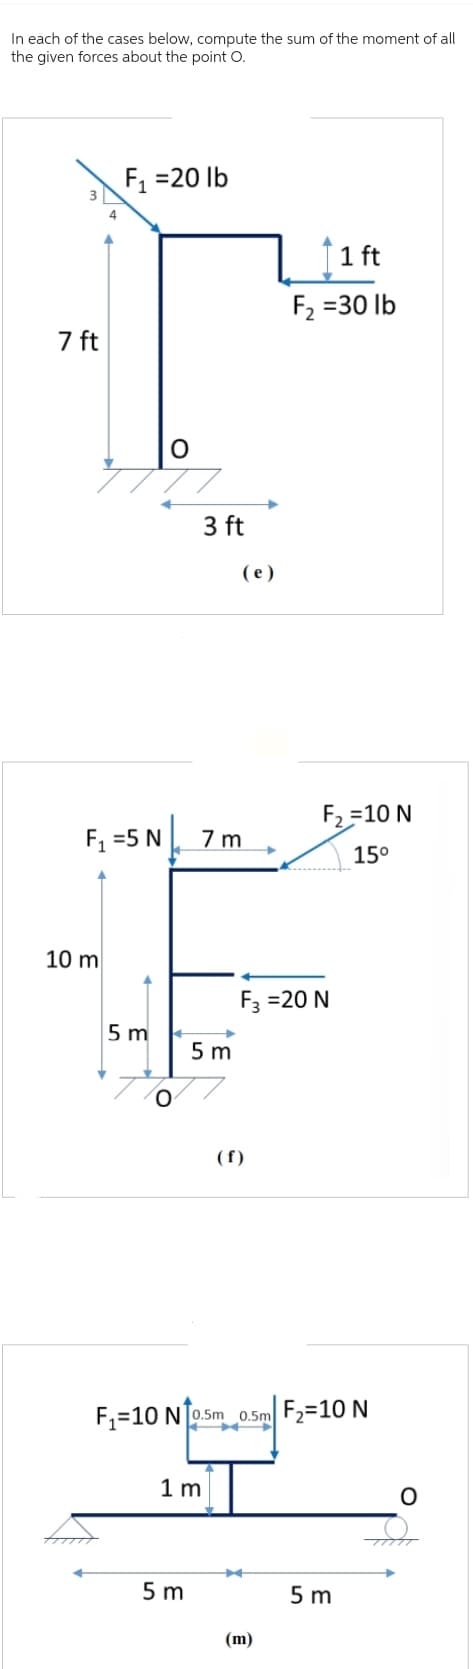 In each of the cases below, compute the sum of the moment of all
the given forces about the point O.
7 ft
F₁ =20 lb
F₁ = 5 N
10 m
5m
O
O
3 ft
5m
7 m
5 m
(e)
1 m
(f)
1 ft
F₂ =30 lb
F3 =20 N
F₁-10 N 0.5m 0.5m F₂=10 N
F₂=10 N
15⁰
(m)
5m